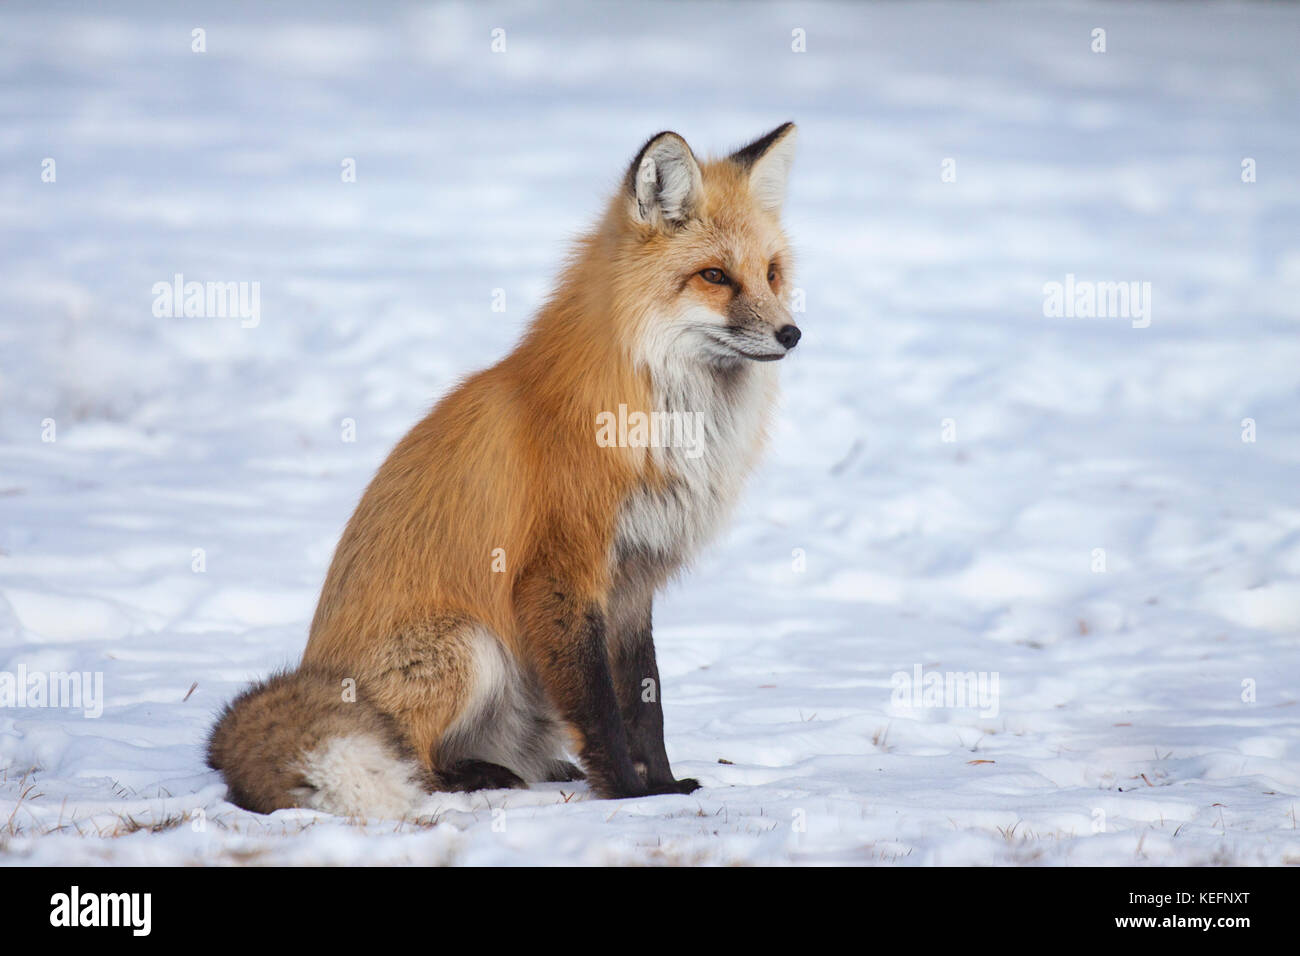 Red fox during winter with heavy fur protecting it from the bitter cold in Yellowstone National Park, Wyoming Stock Photo